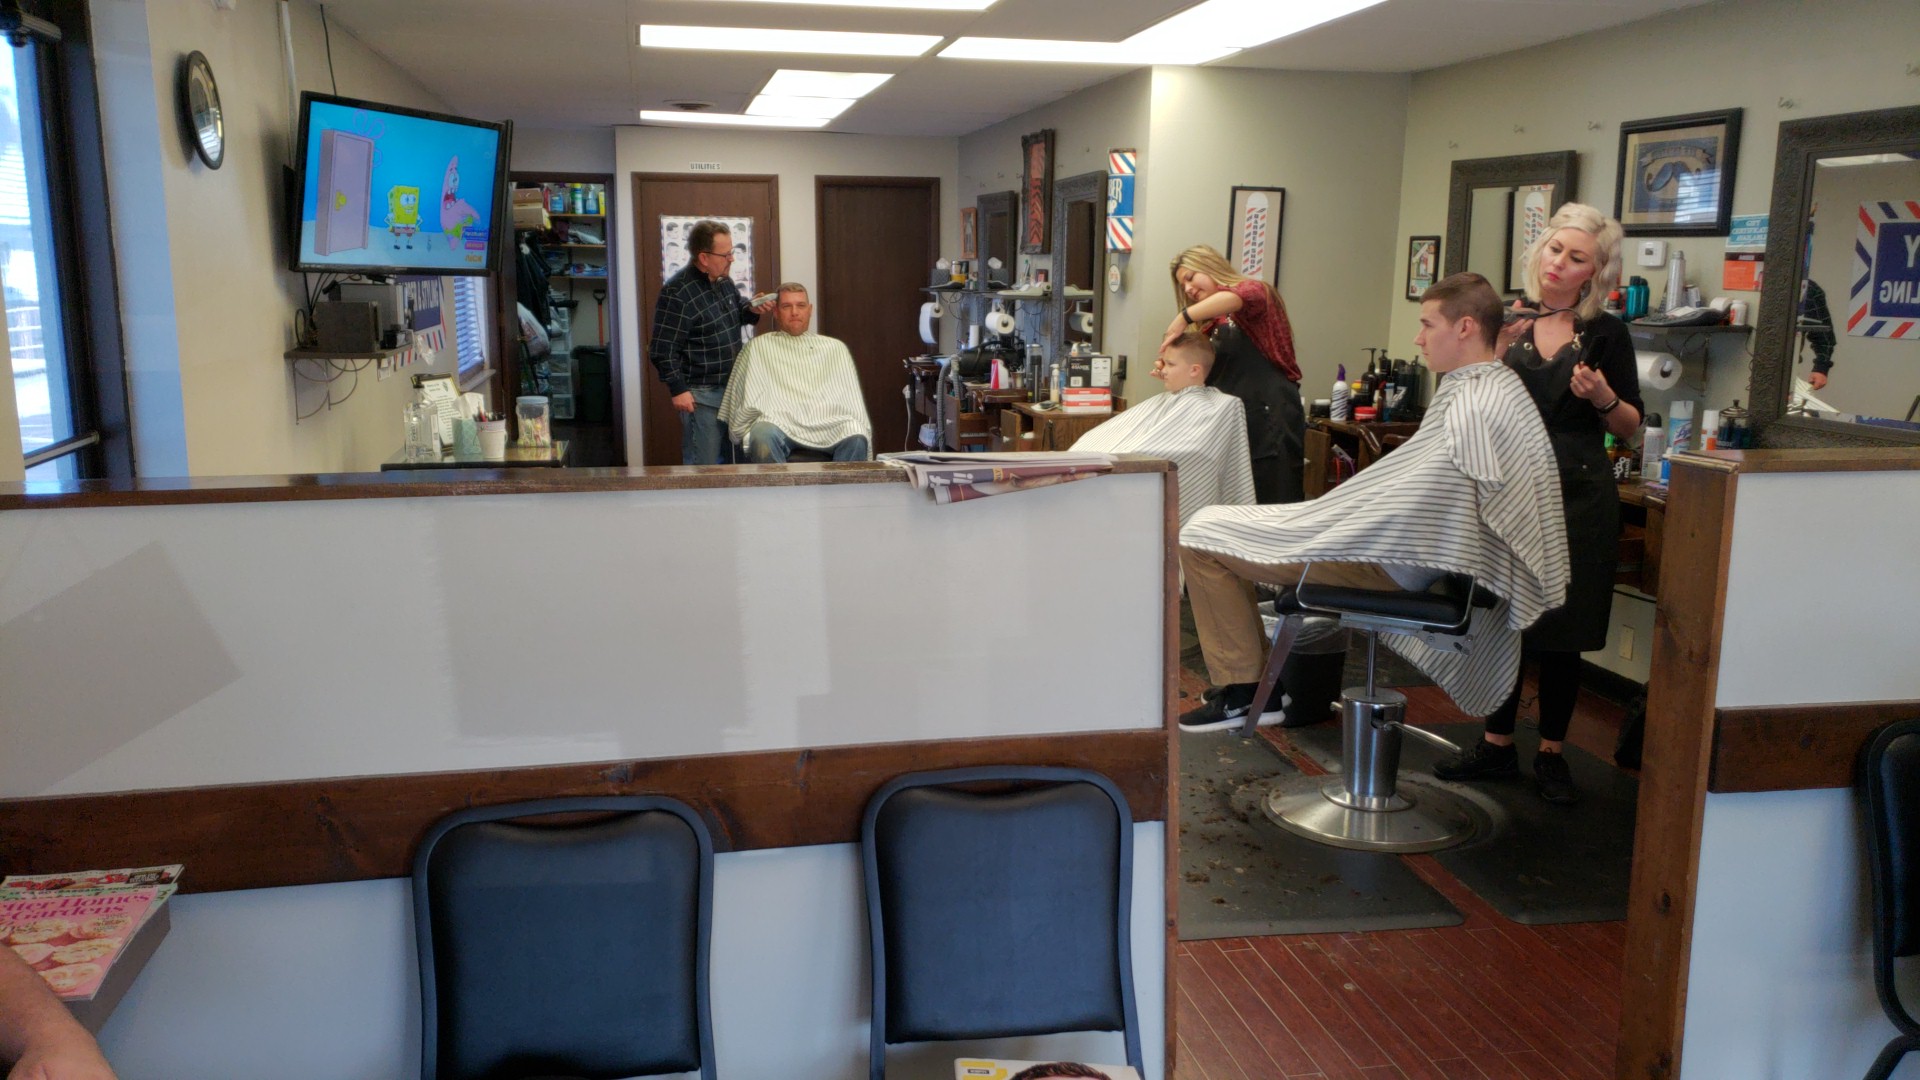 Hinckley Barber & Styling 53 W 130th St A, Hinckley Ohio 44233